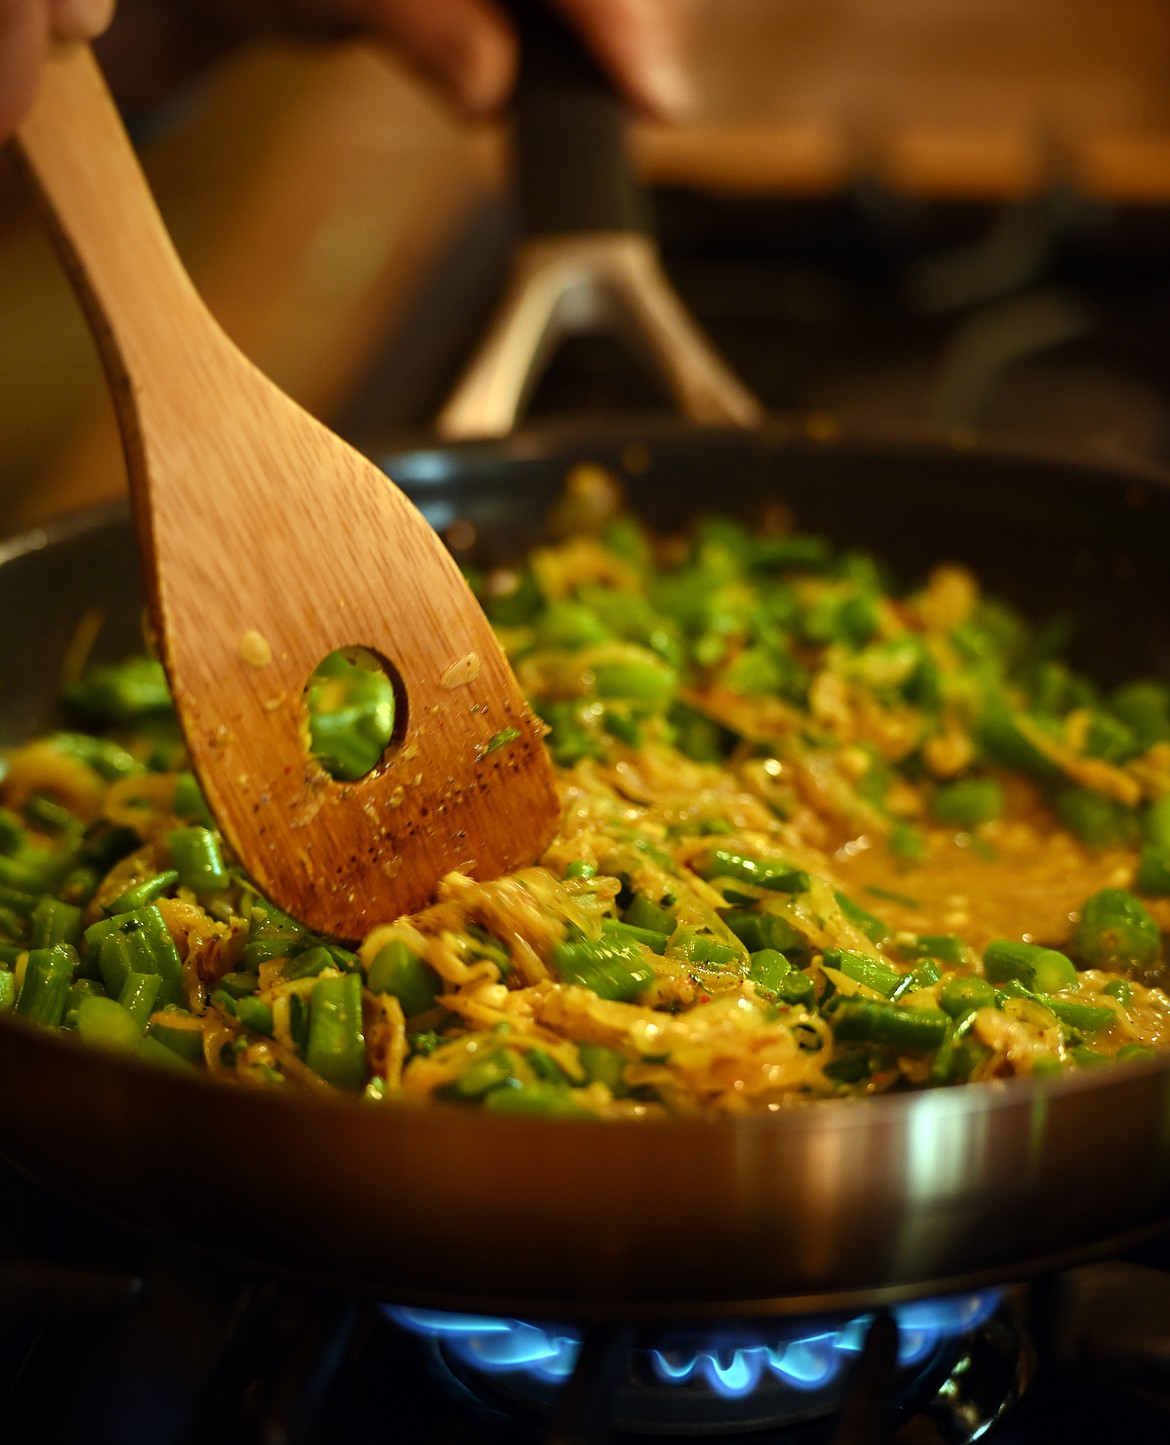 A skillet full of broccoli, onions, garlic and freshly made curry spice simmers.